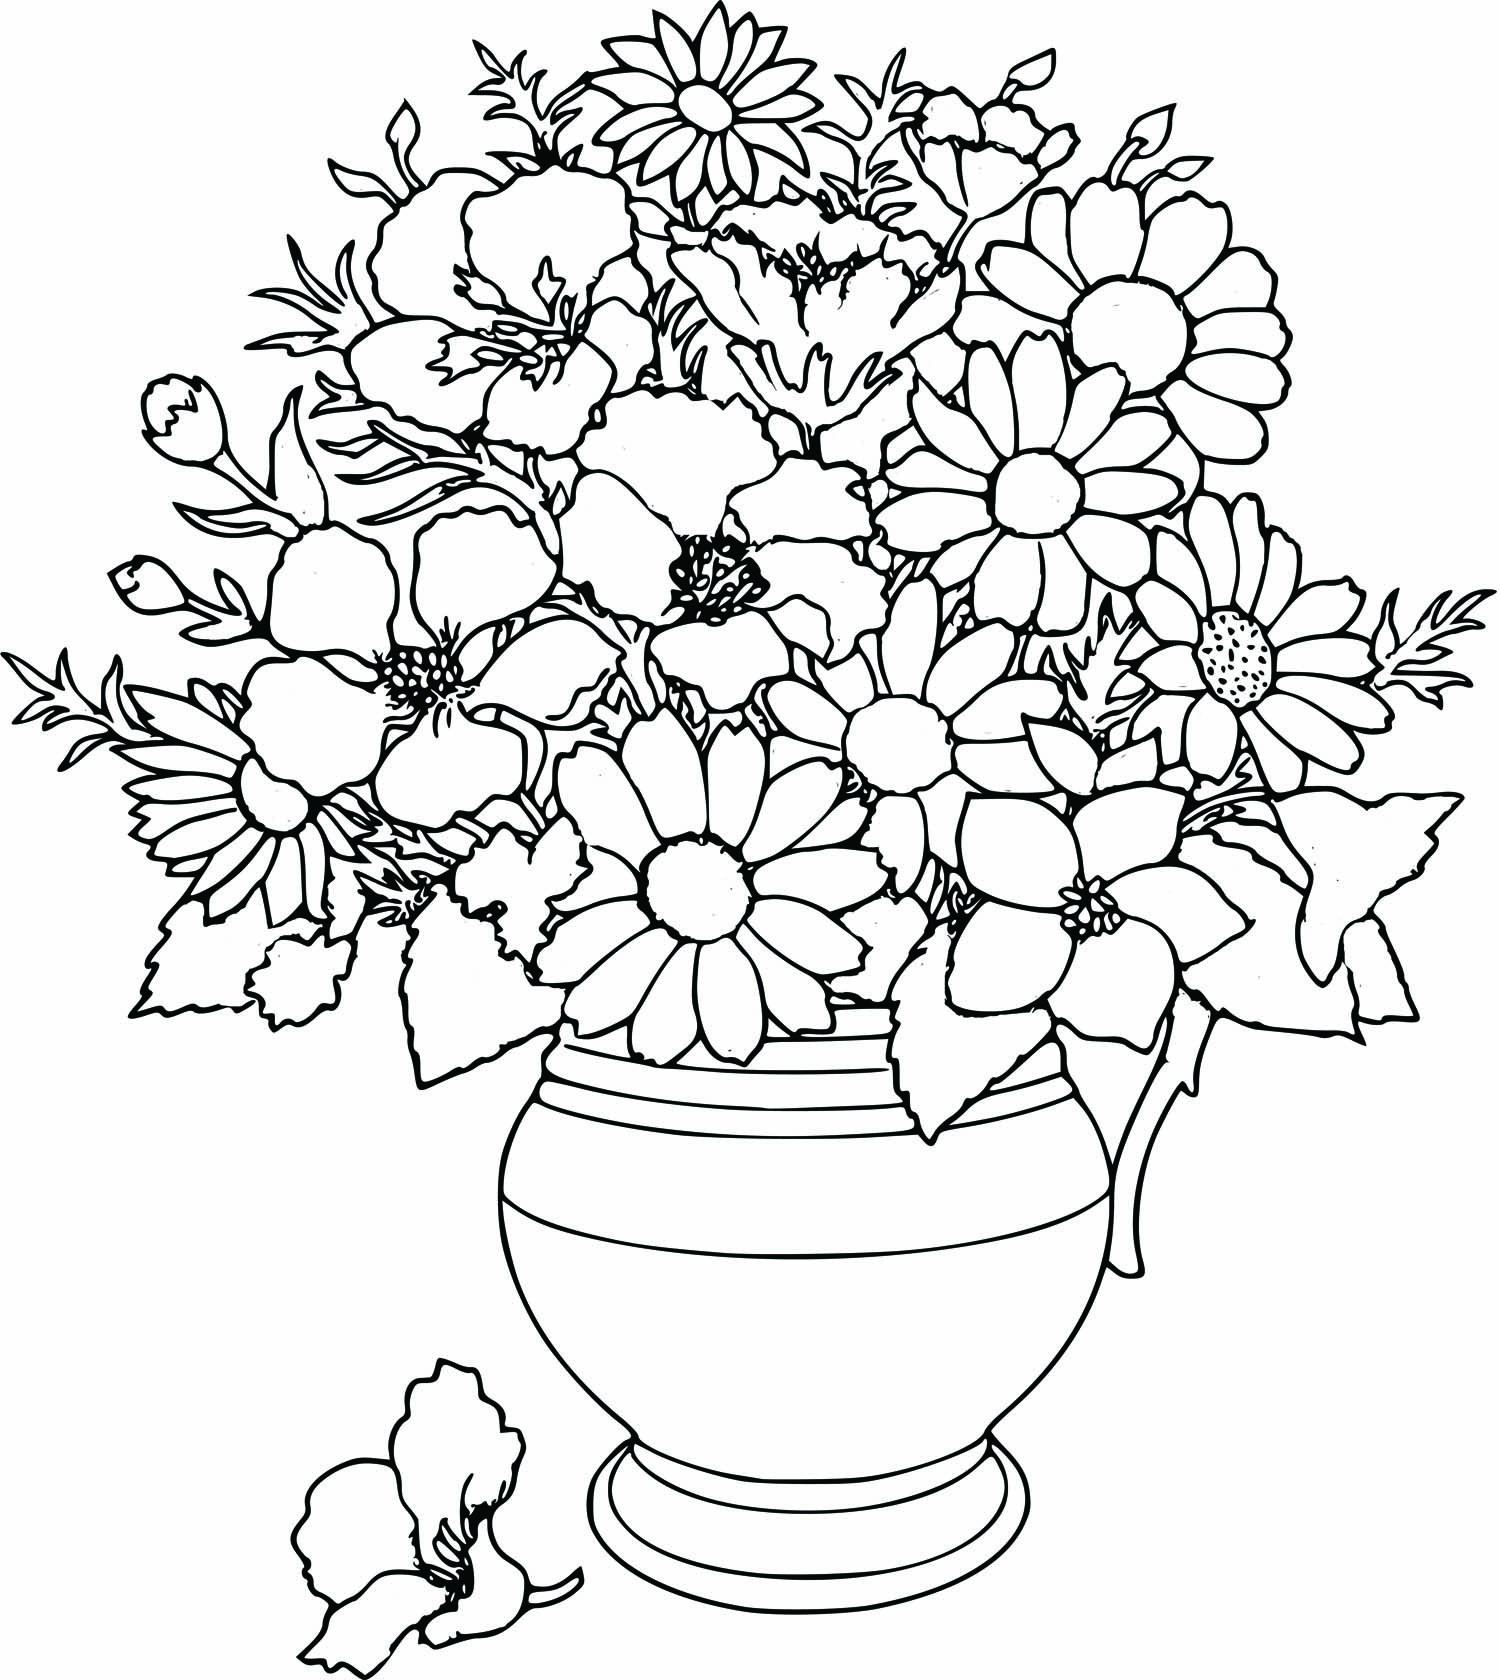 Free Printable Coloring Pages Of Flowers
 Mother’s Day Colouring Contest